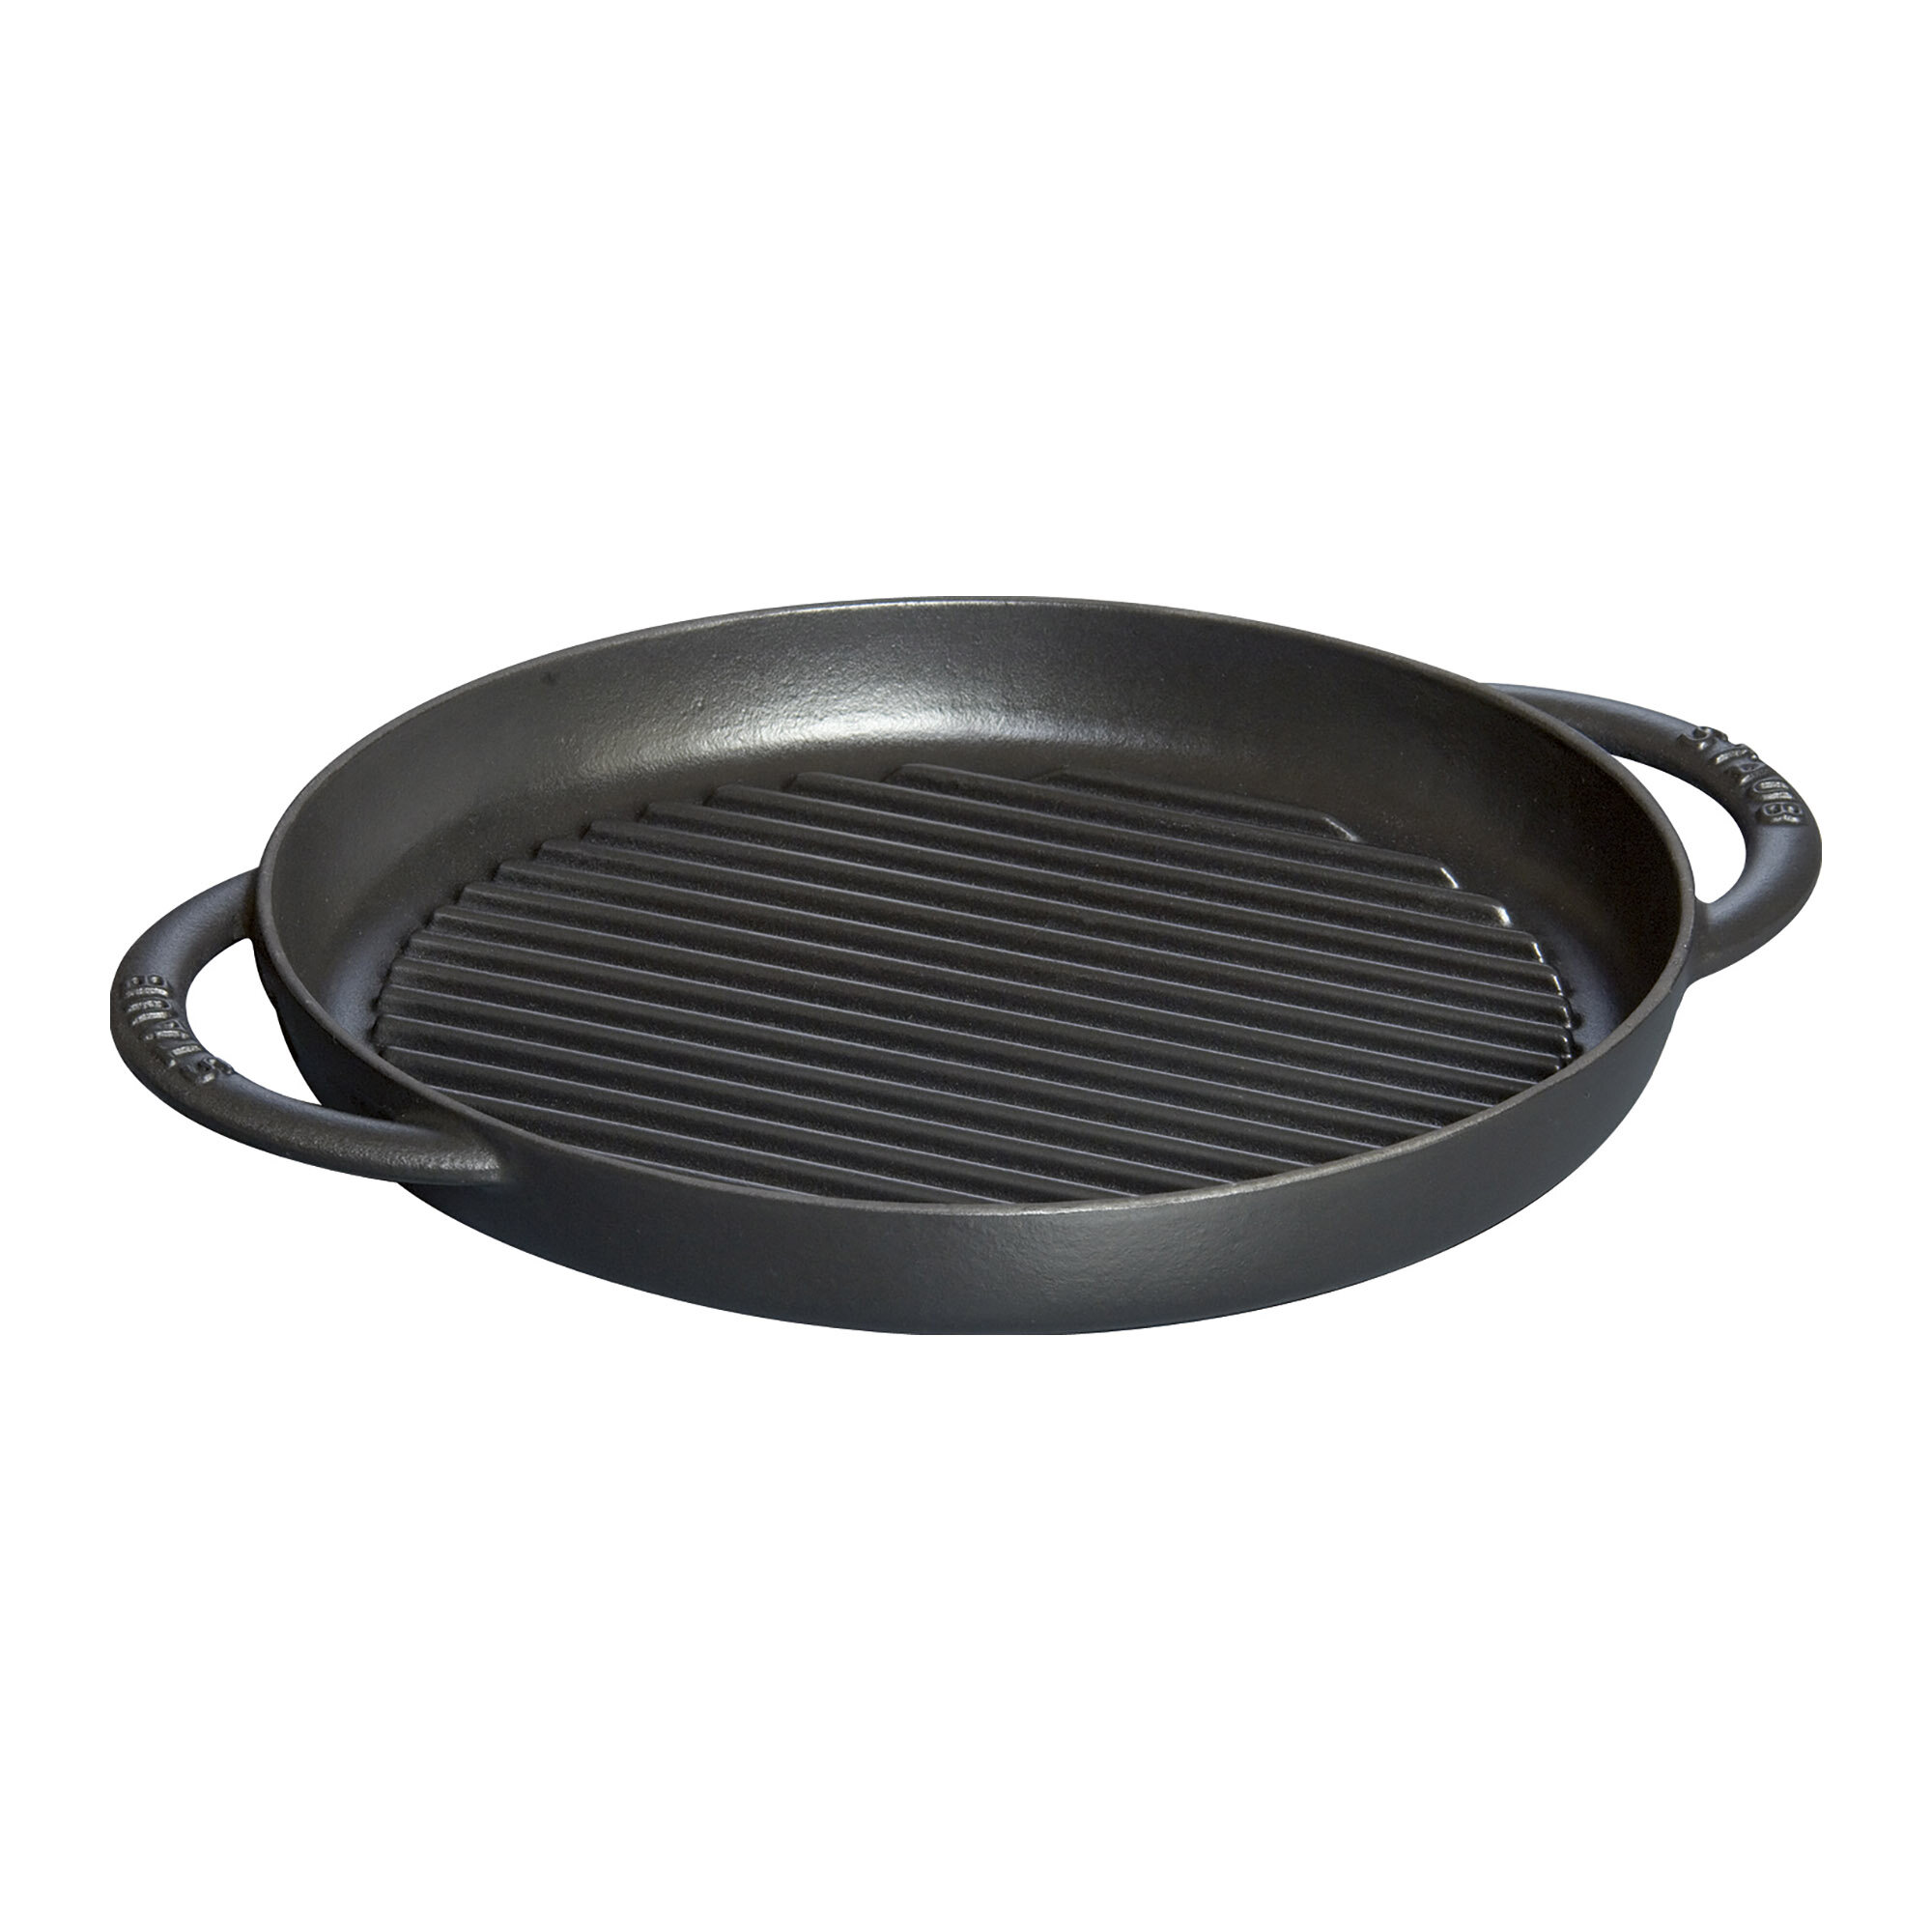 Nordic Ware Professional Weight 10 Inch Texas Skillet